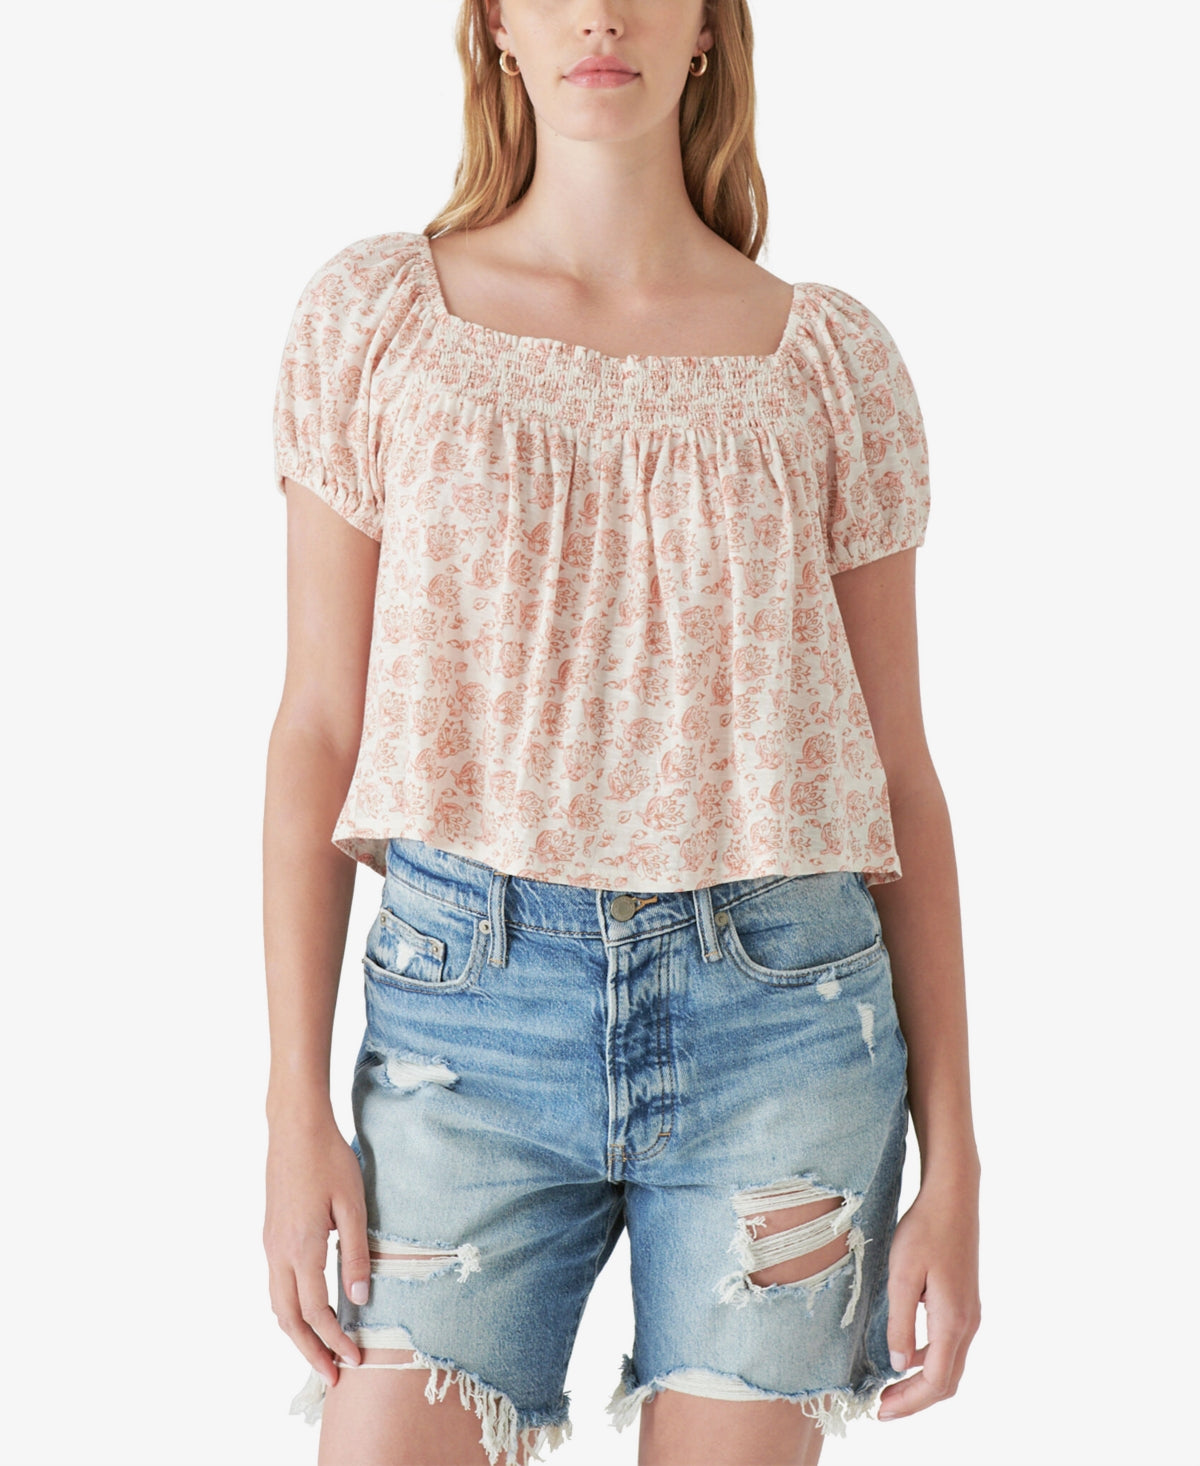 Lucky Brand Women's Square Neck Floral Print Cotton Blend Top